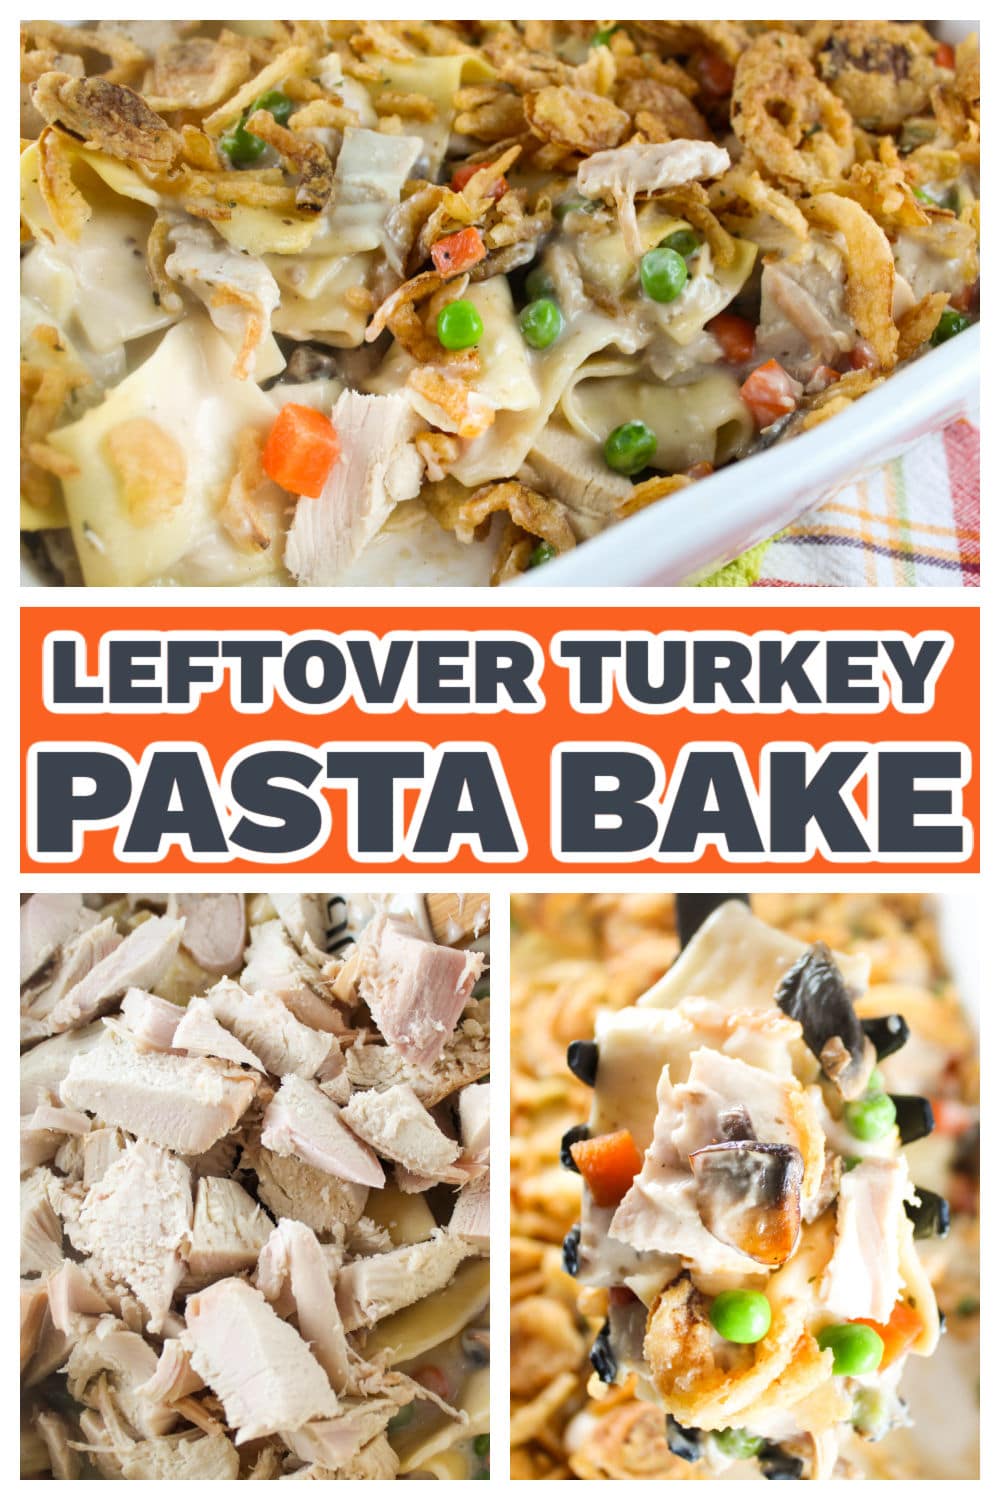 This Creamy Turkey Pasta comes together super quickly with leftovers like turkey and mixed veggies! It's super simple and is a great way to change up dinner! Plus - it's so tasty - everybody will GOBBLE it up! via @foodhussy